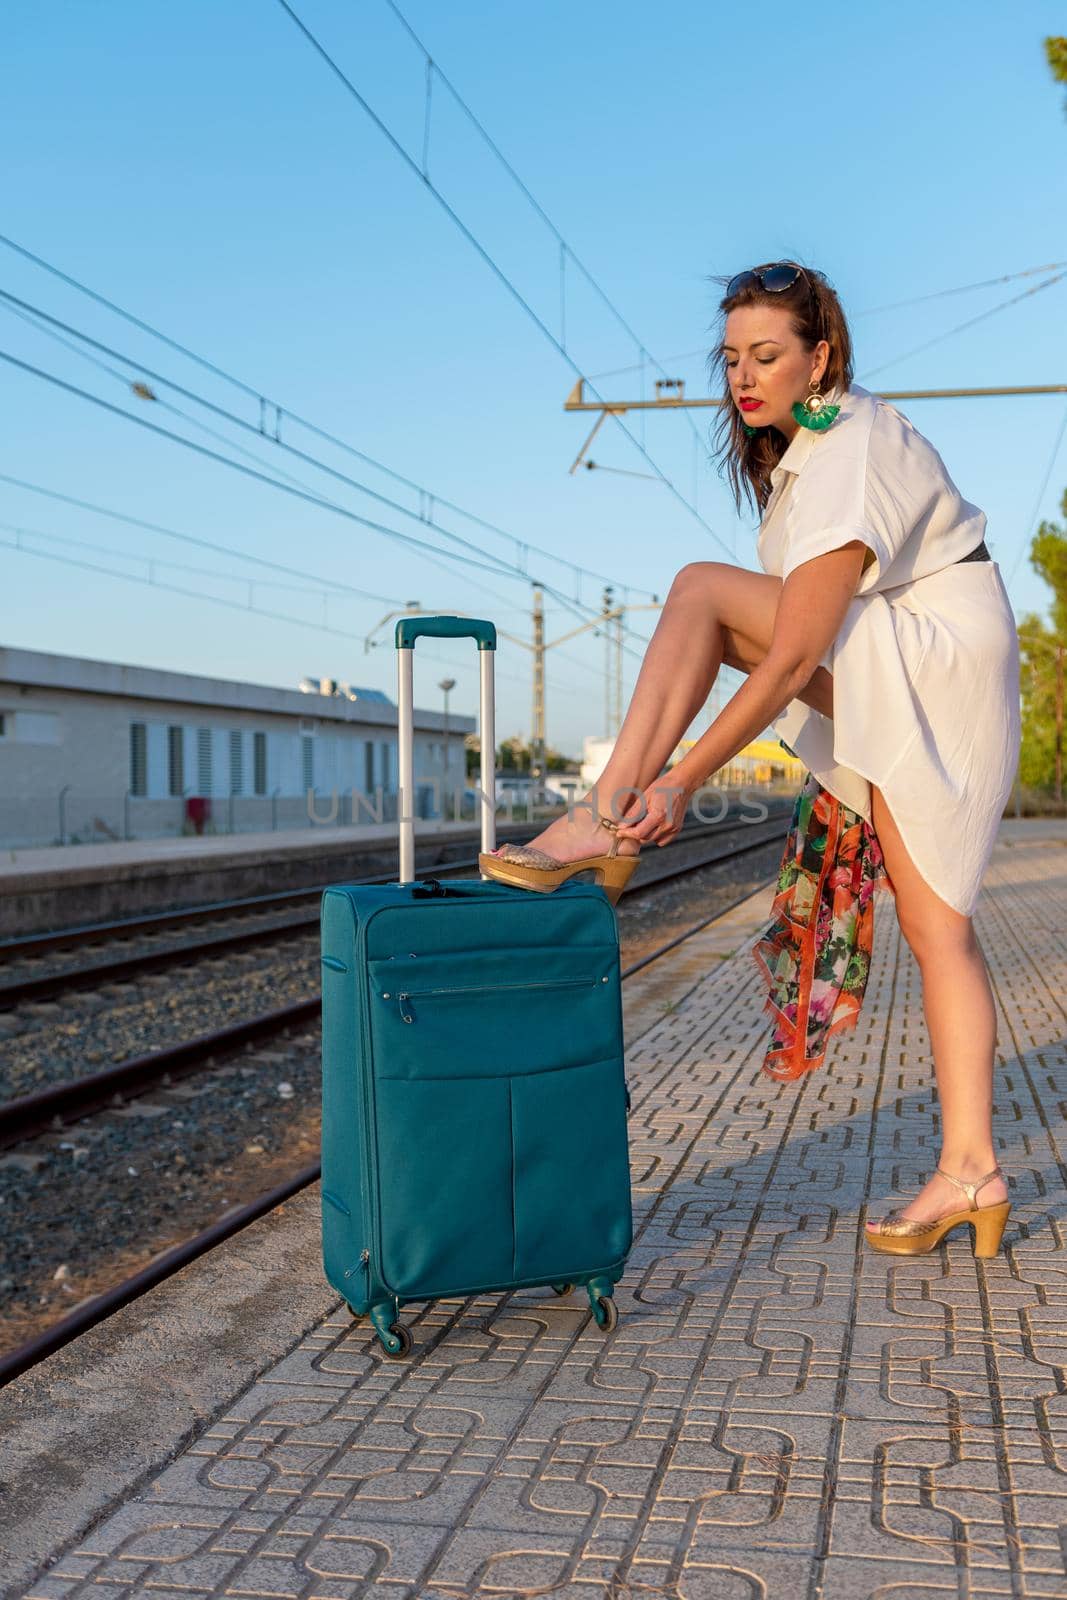 Girl with a suitcase at the train station by Mareno